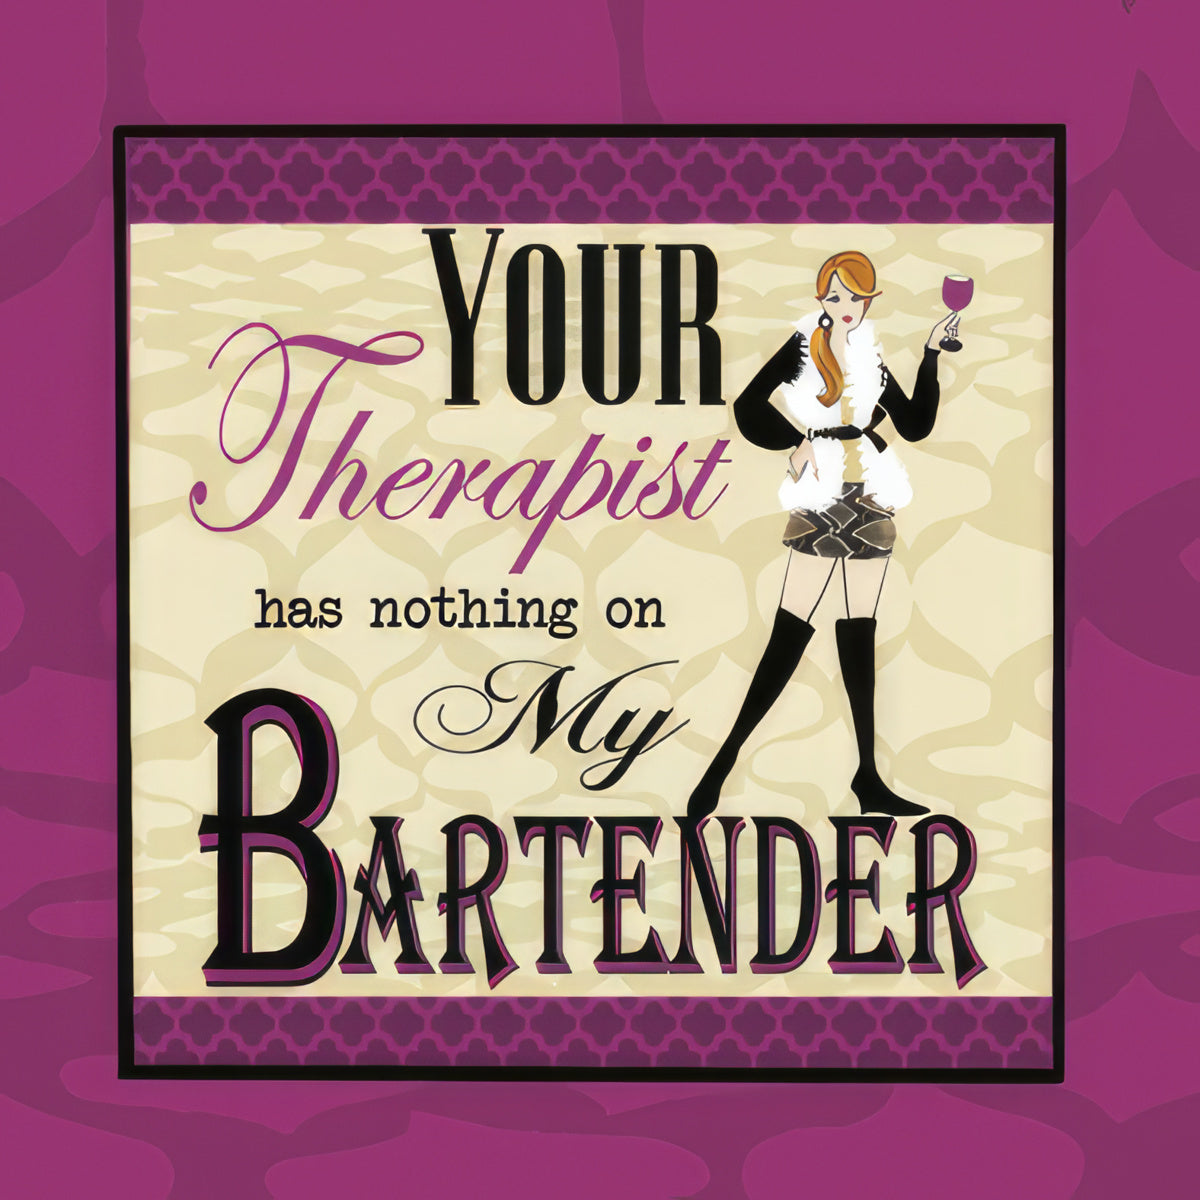 Your Therapist has nothing on My Bartender